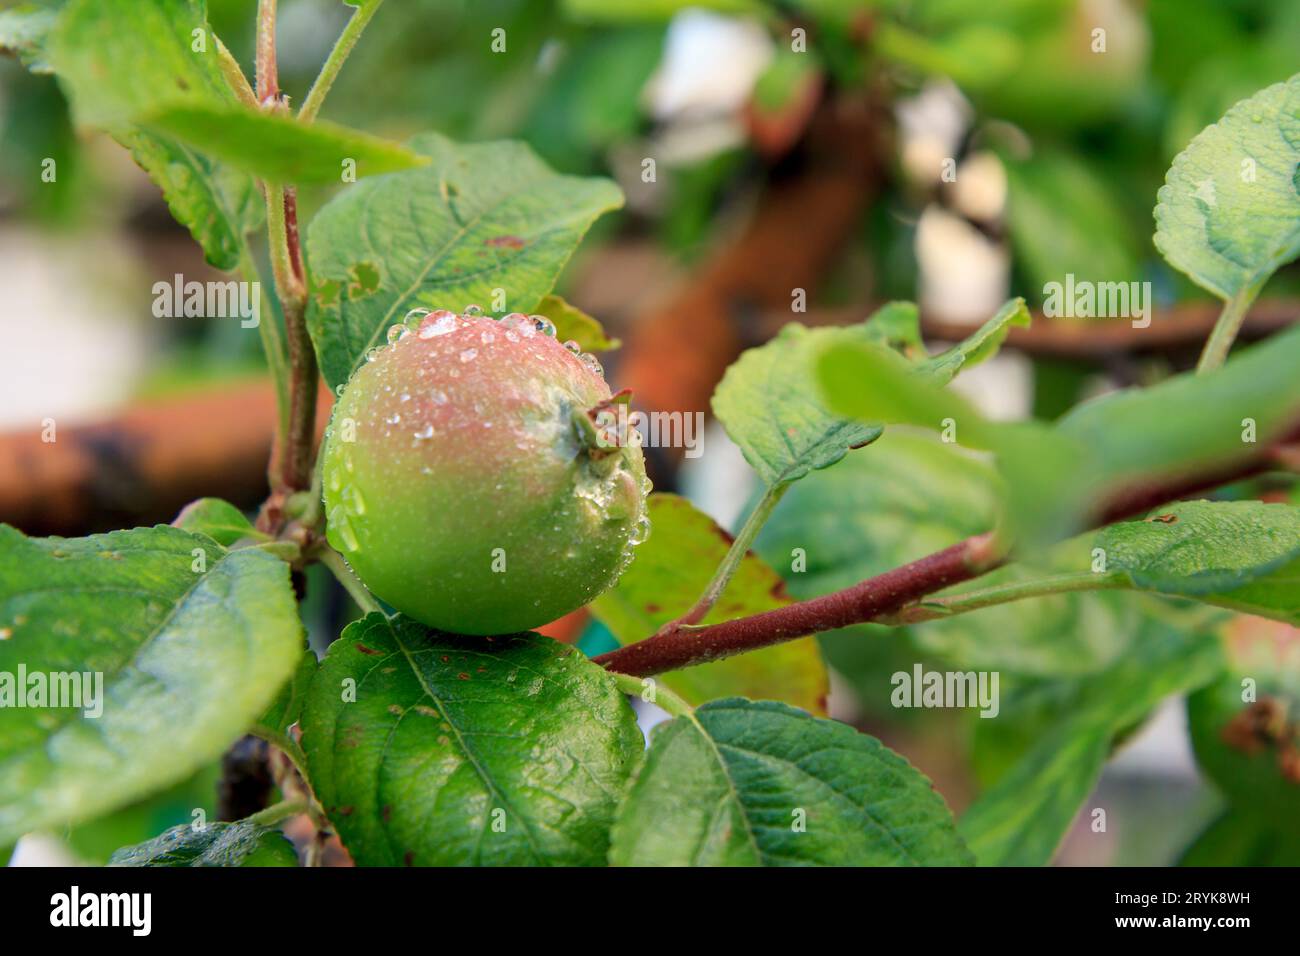 Fruit of an immature apple on the branch of the tree. Stock Photo